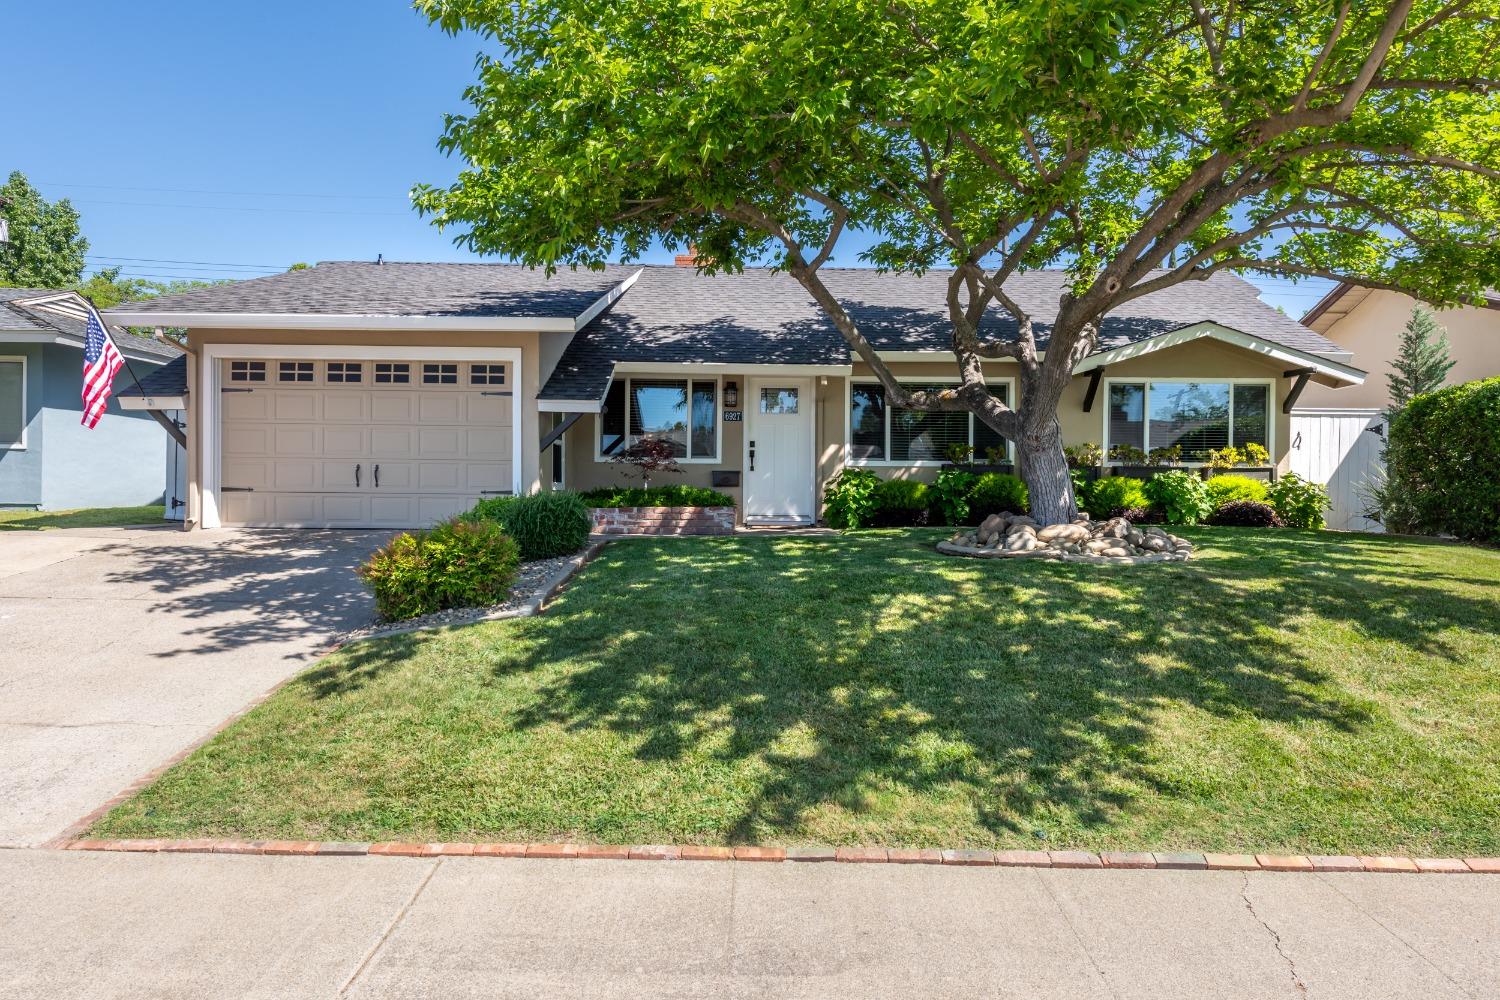 Photo of 6927 Oak Spring Wy in Citrus Heights, CA